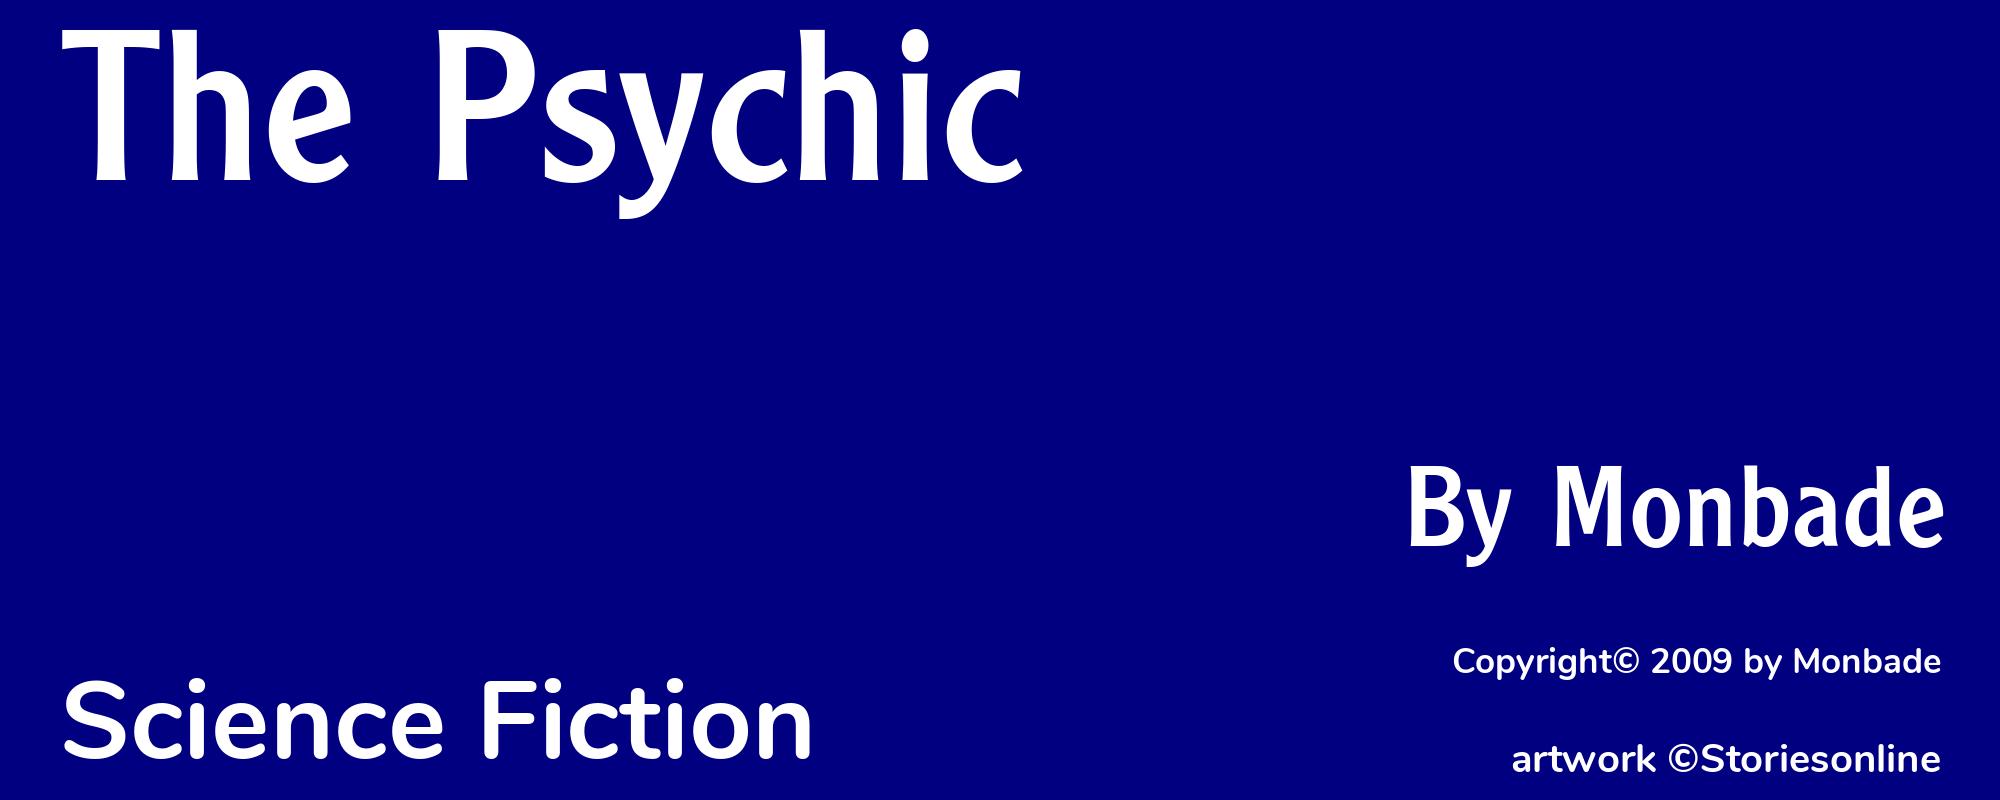 The Psychic - Cover